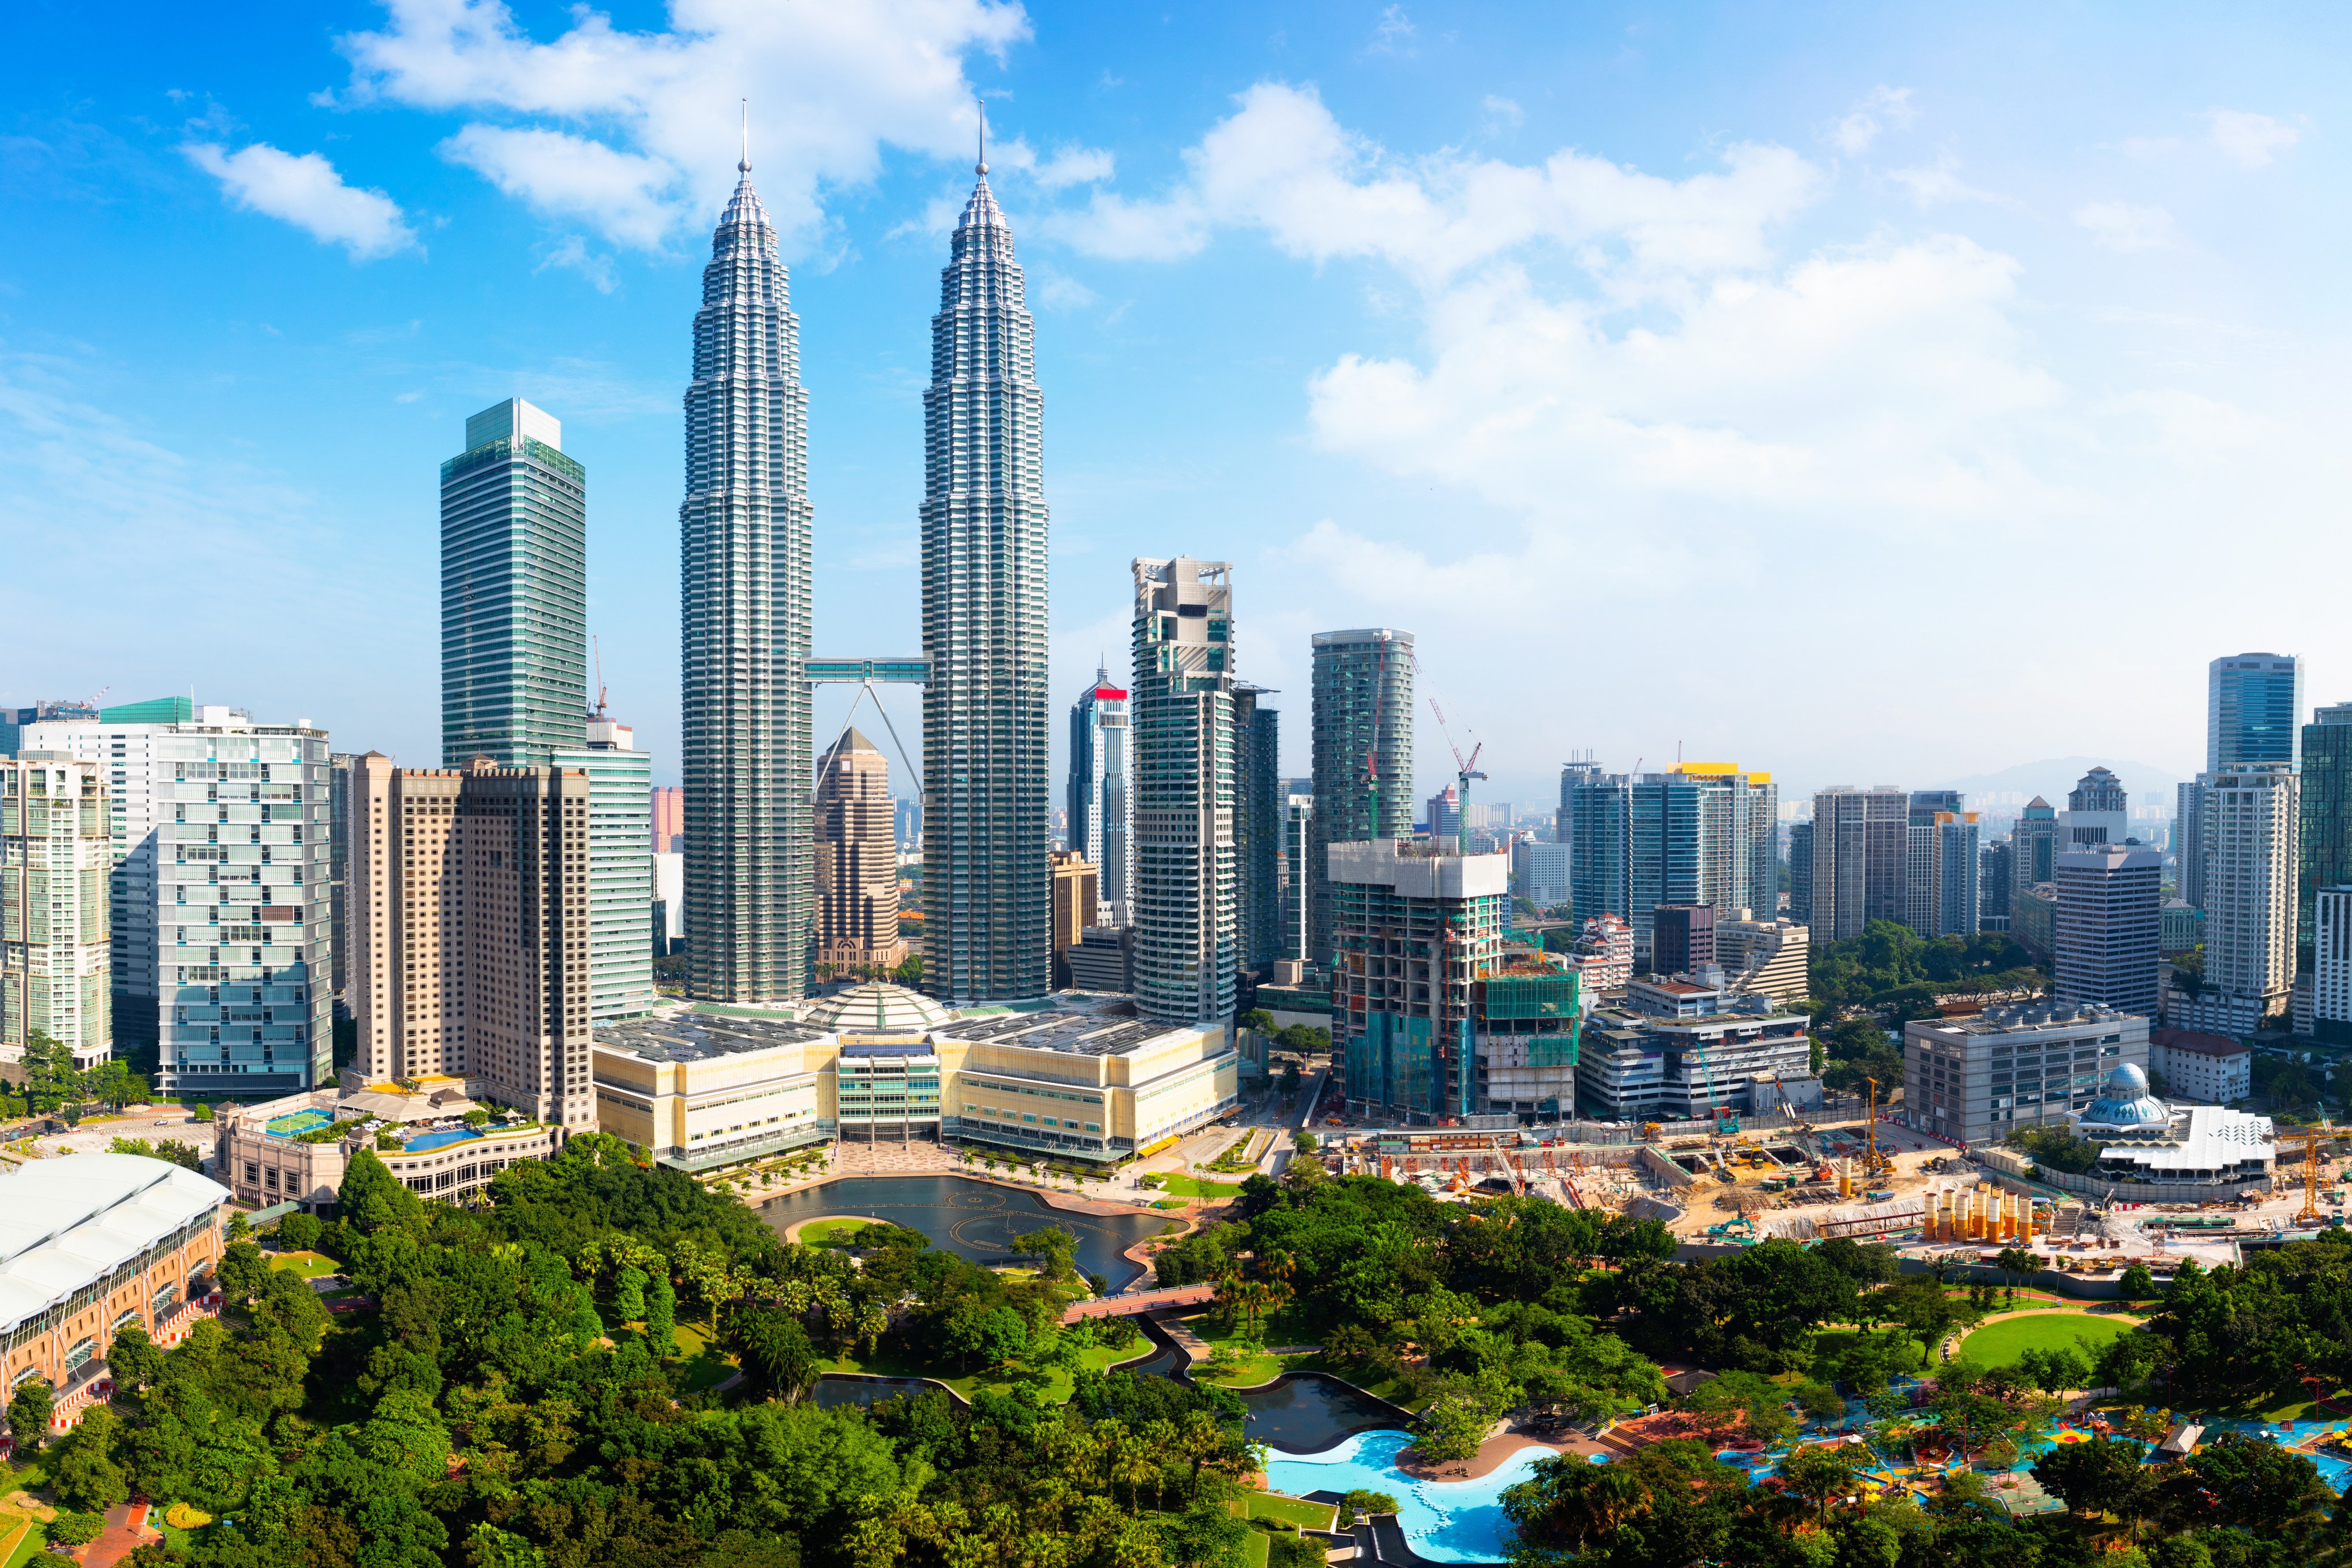 Kuala Lumpur. Experts say many Malaysian start-ups don’t have the luxury of scaling or building their businesses with a long-term growth model and are instead compelled to quickly turn a profit. Photo: Shutterstock